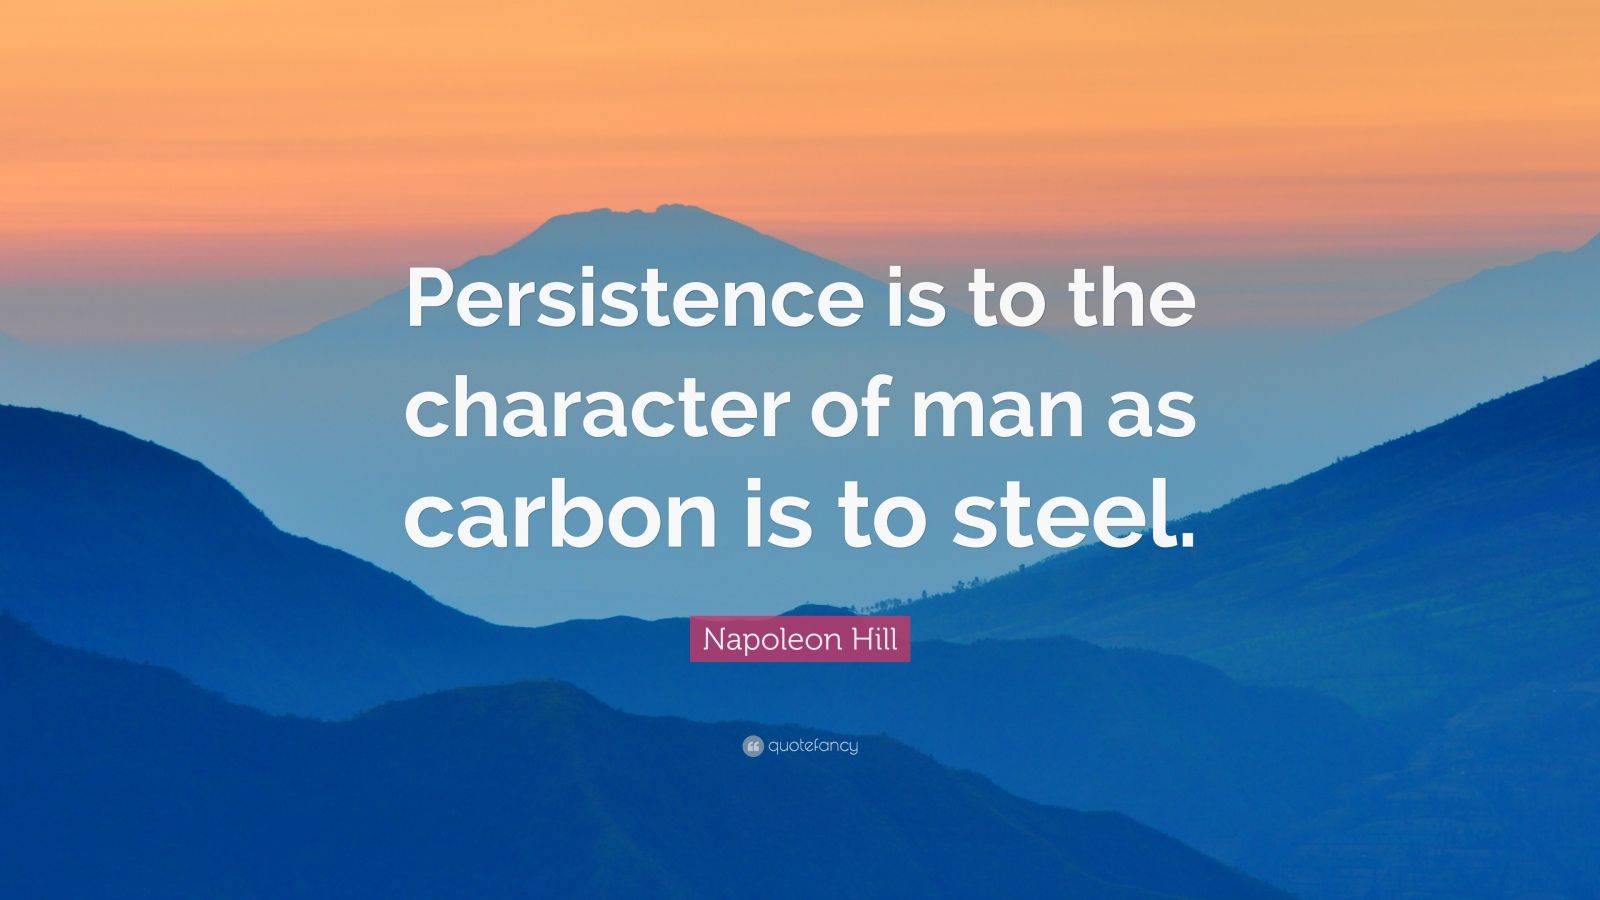 Napoleon Hill Quote: “Persistence is to the character of man as carbon ...